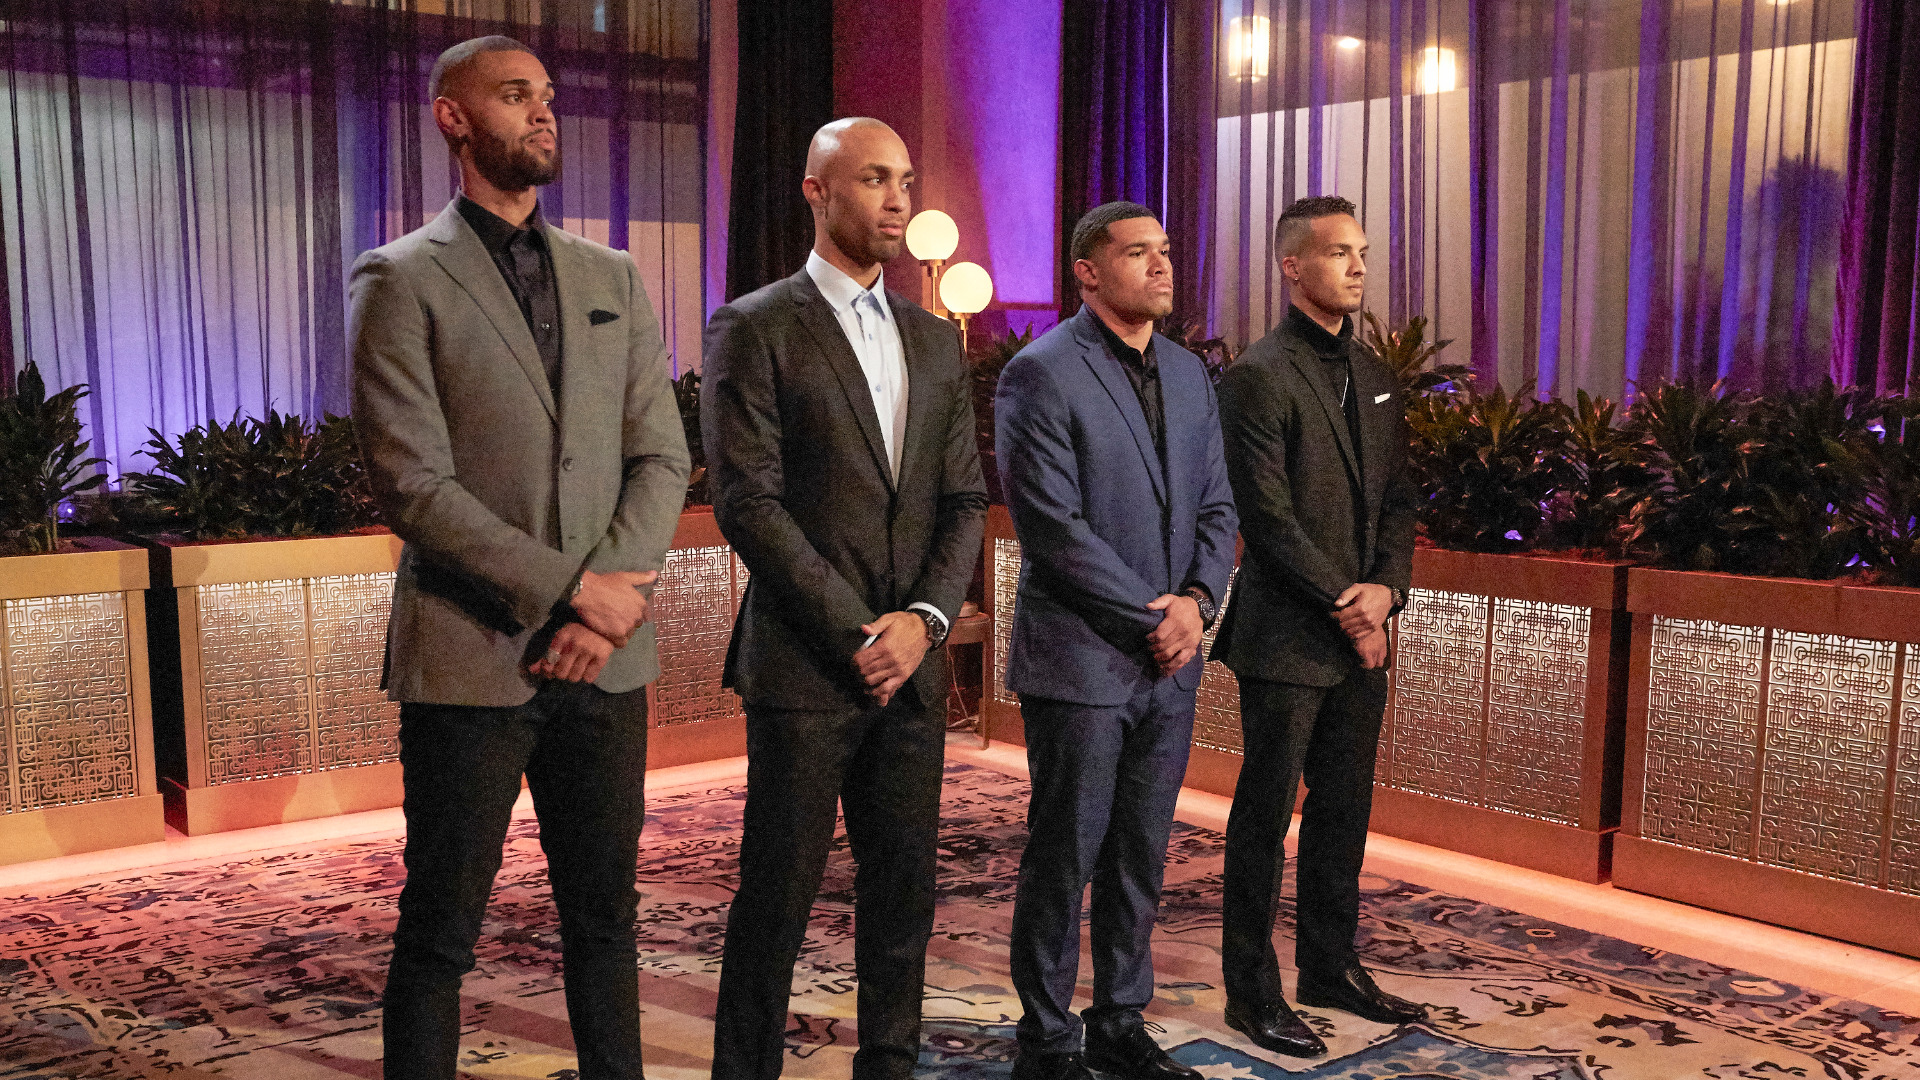 Nayte Olukoya, Joe Coleman, Rodney Mathews, and Brandon Jones stand in front of Michelle Young before the final four rose ceremony in ‘The Bachelorette’ Season 18 Episode 7